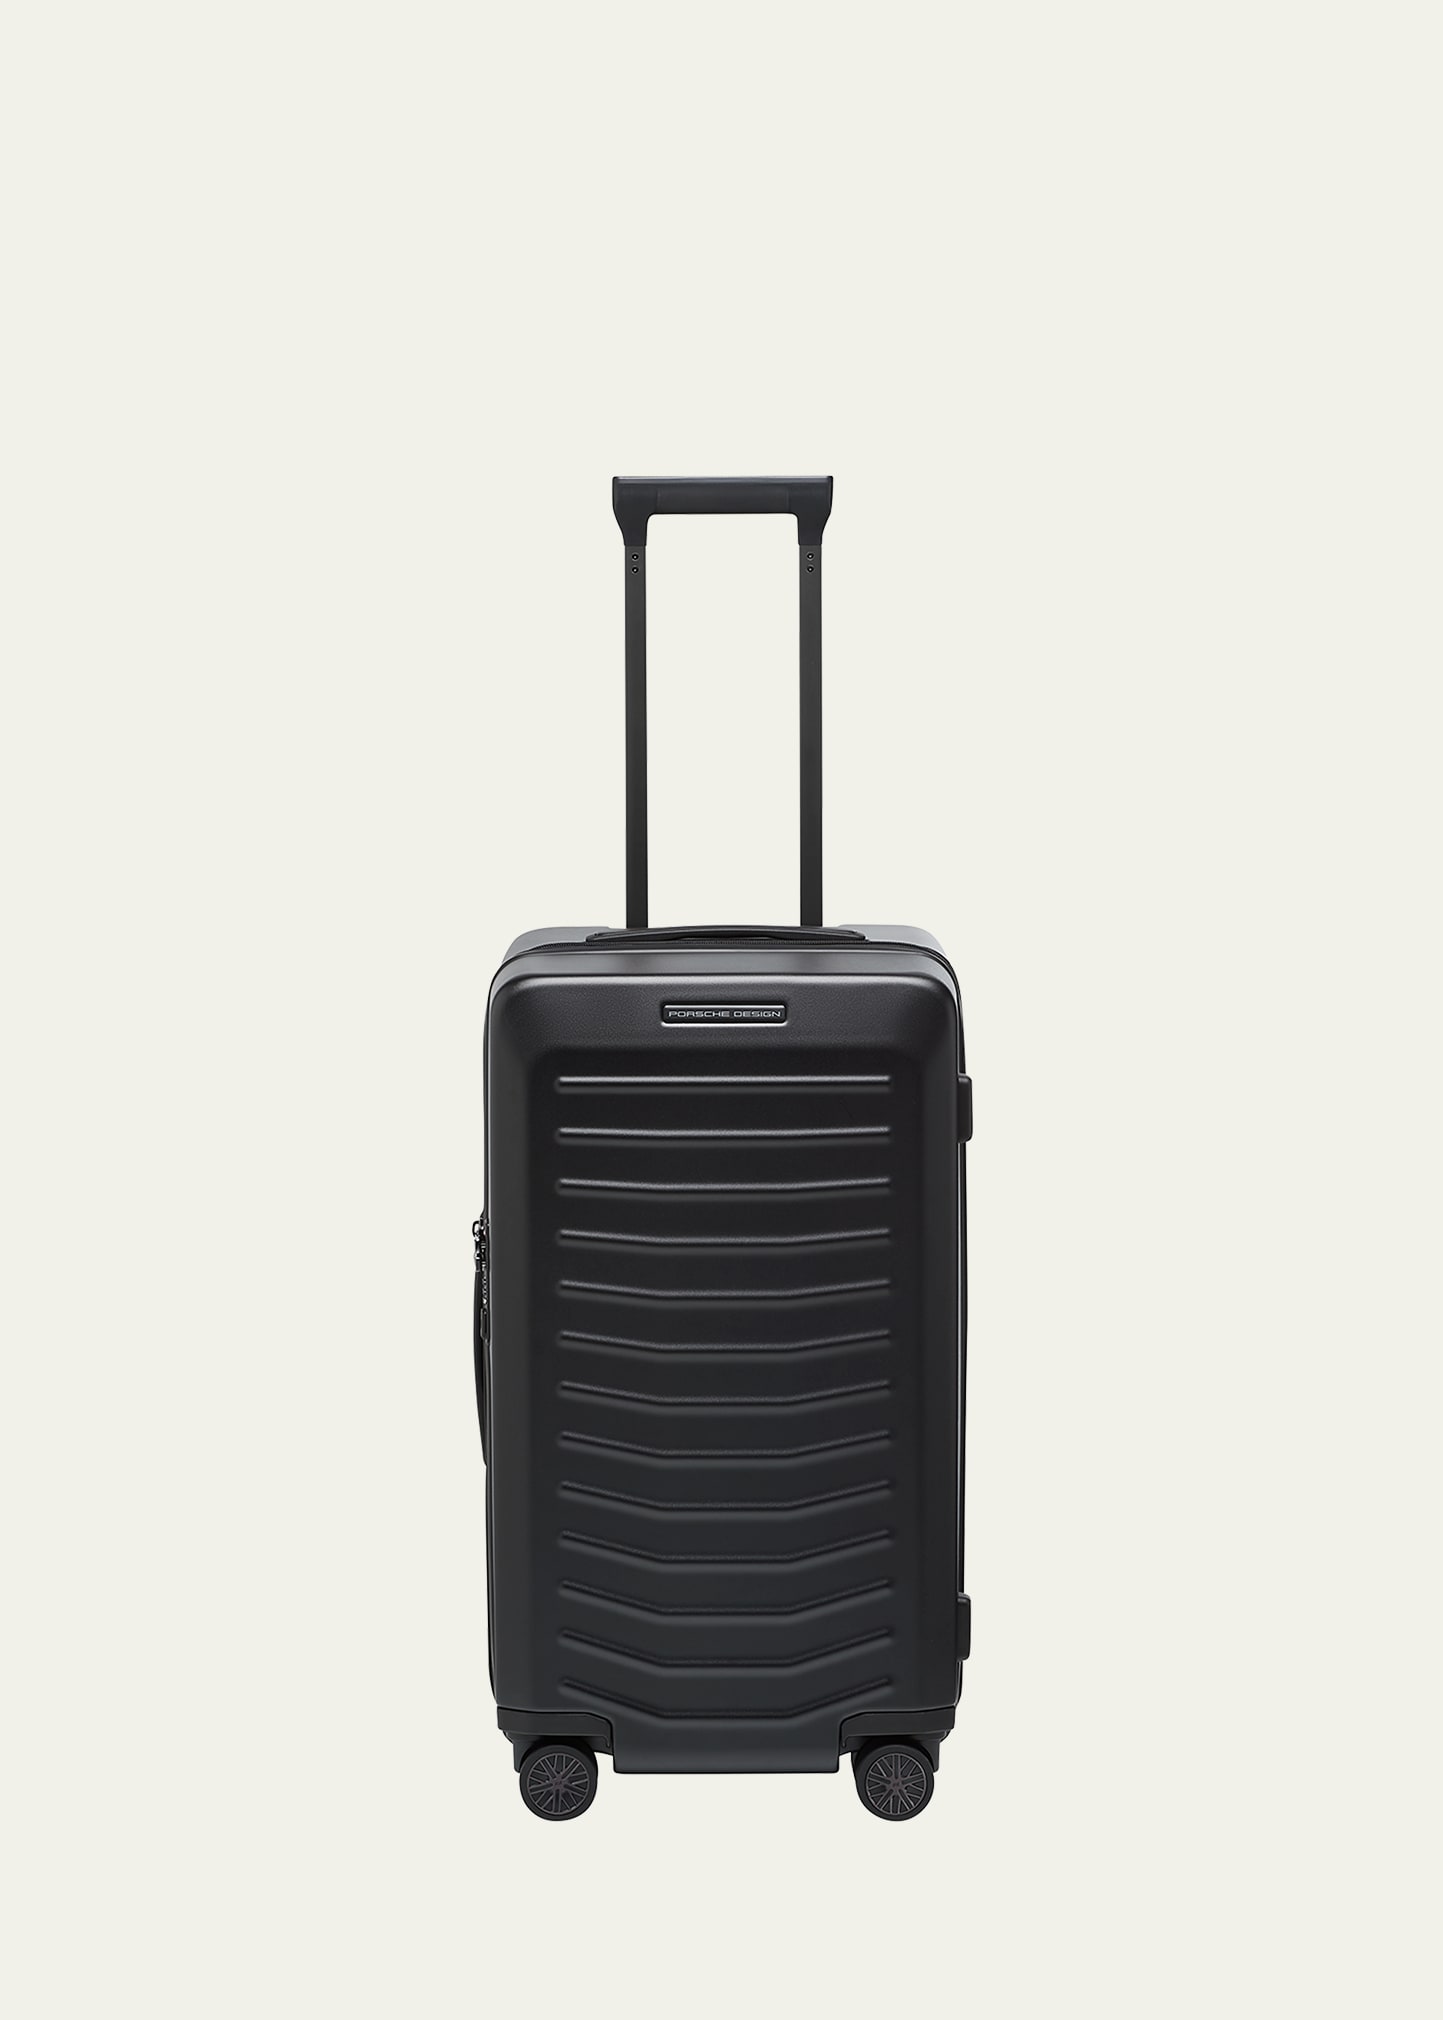 Roadster 26" Trunk Spinner Luggage